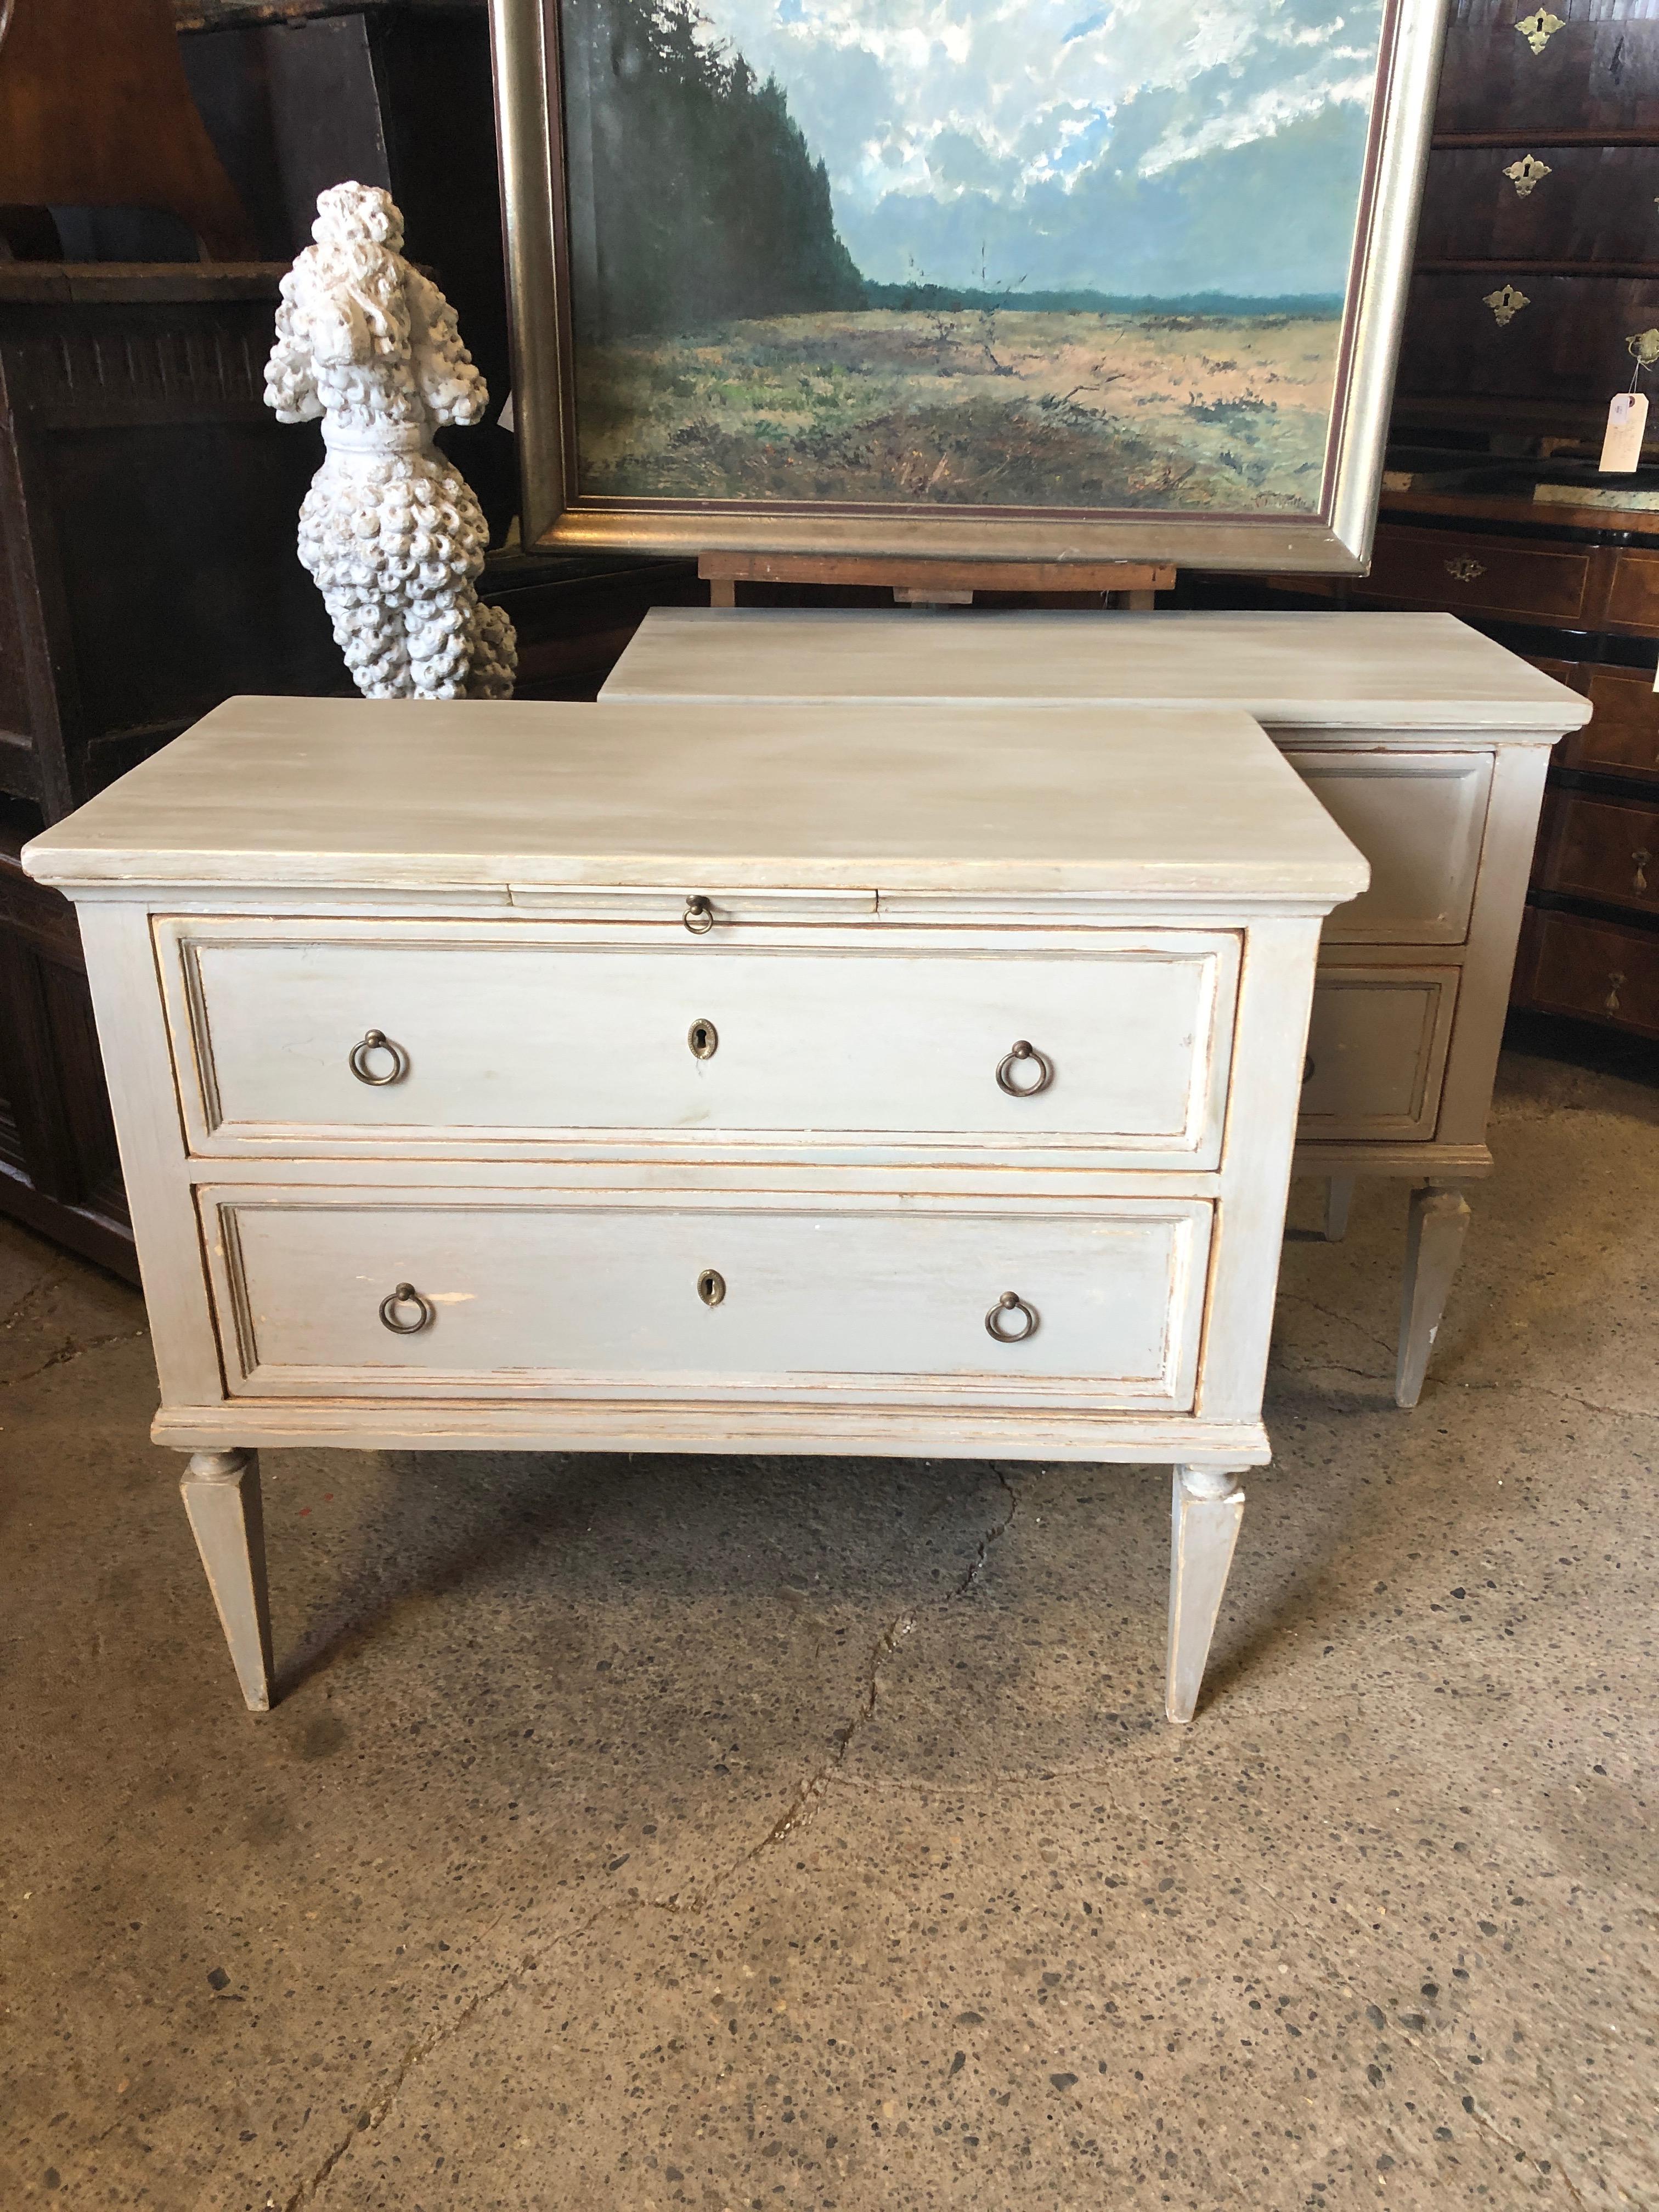 A pair of antique Swedish Gustavian painted wood chests from the early 19th century, with beautiful classic long tapered fluted legs, original hardware and original pull-out writing shelves. Lovely Swedish Blue Gray distressed paint finish. Born in